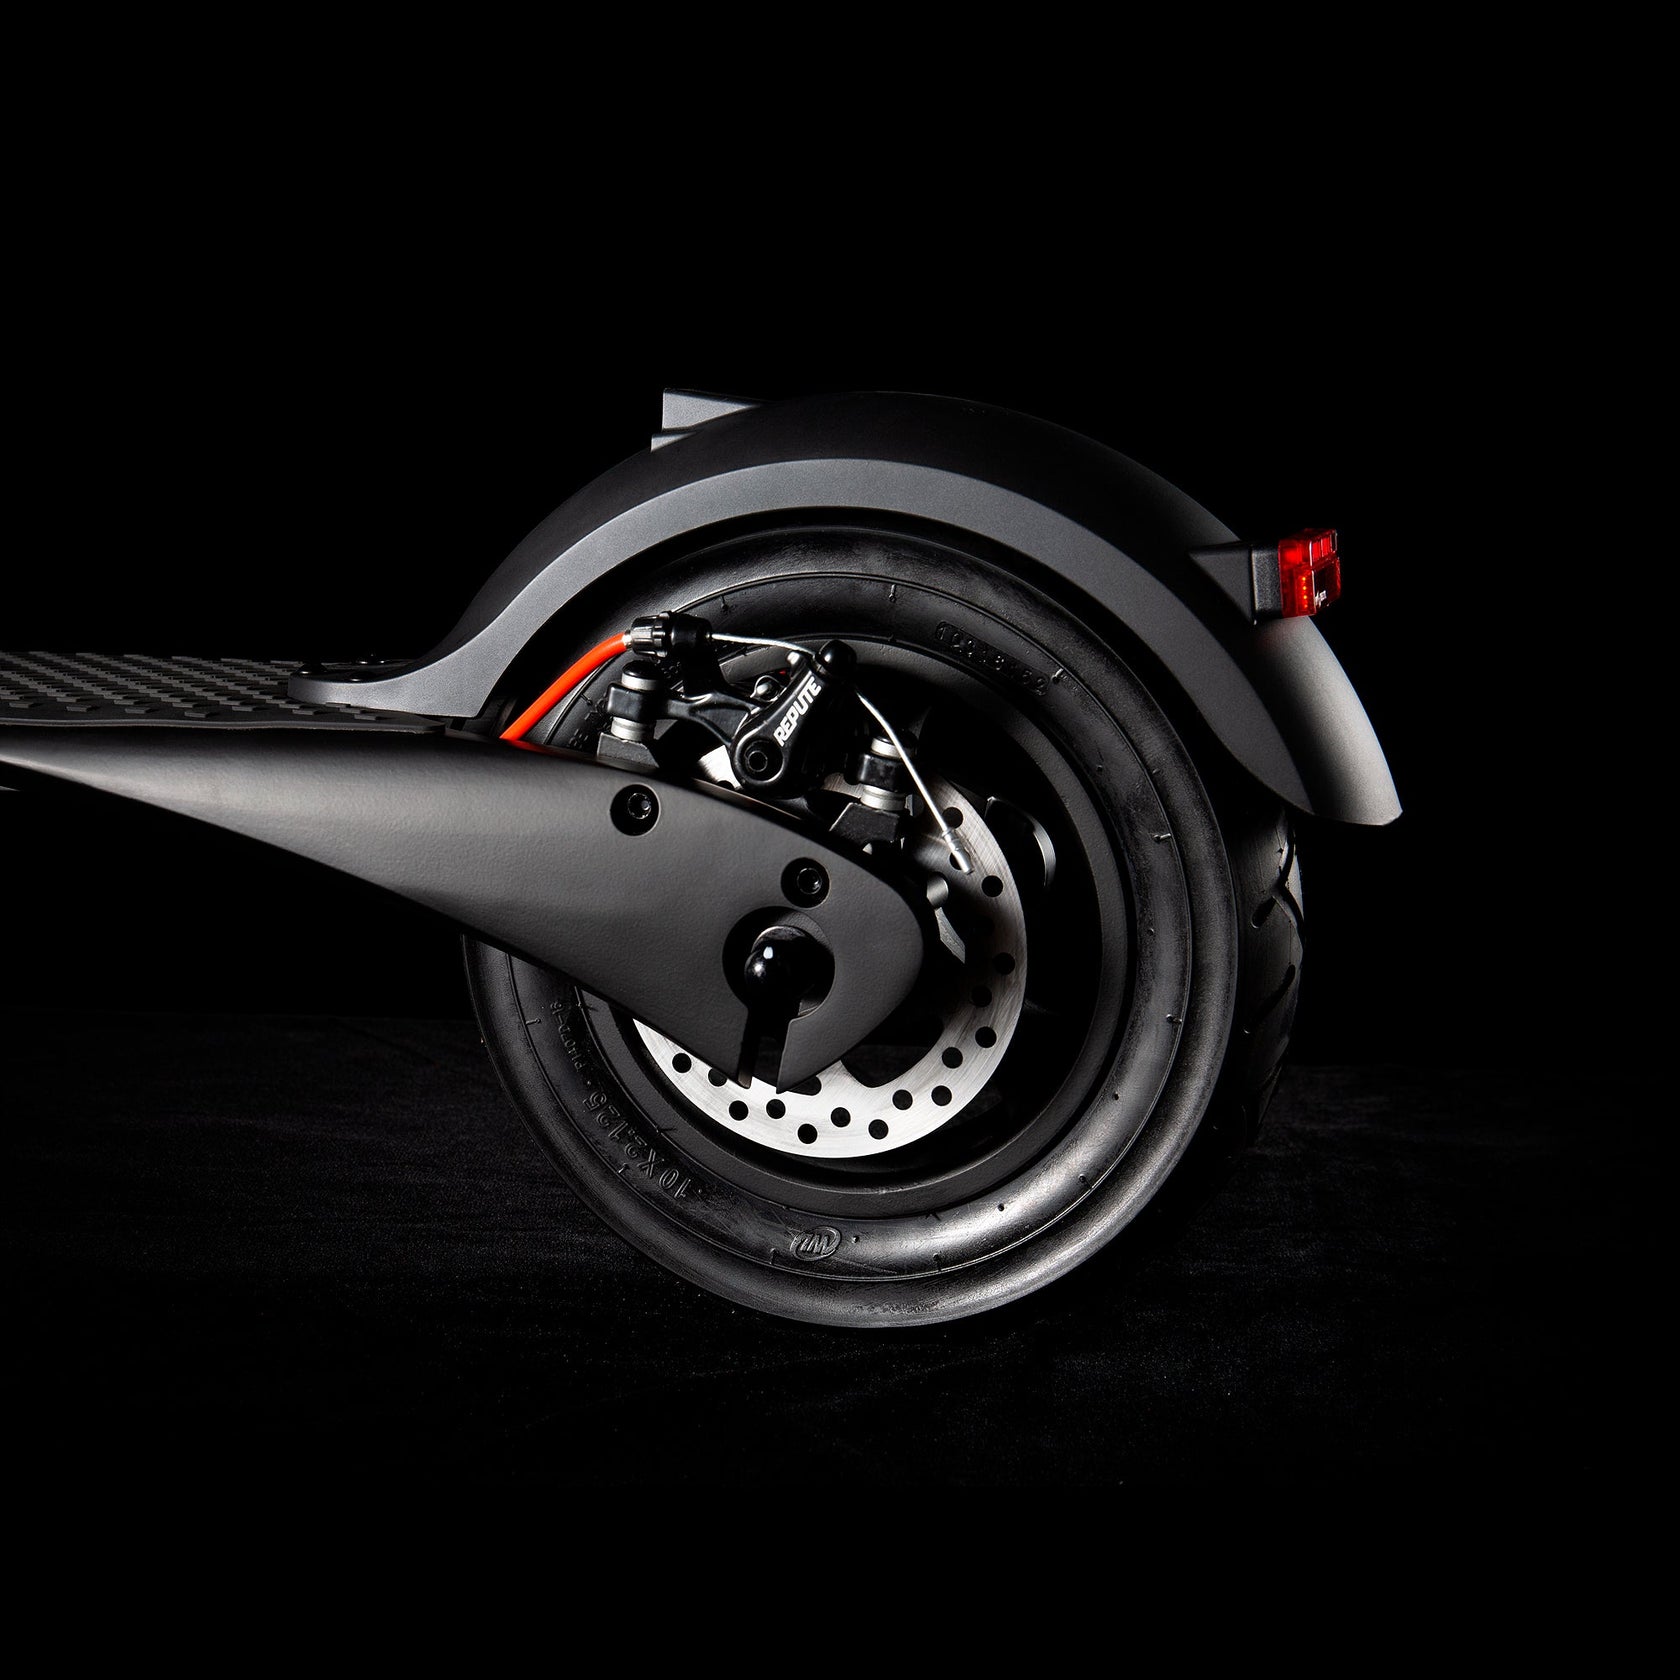 X7 Max Folding Electric Scooter